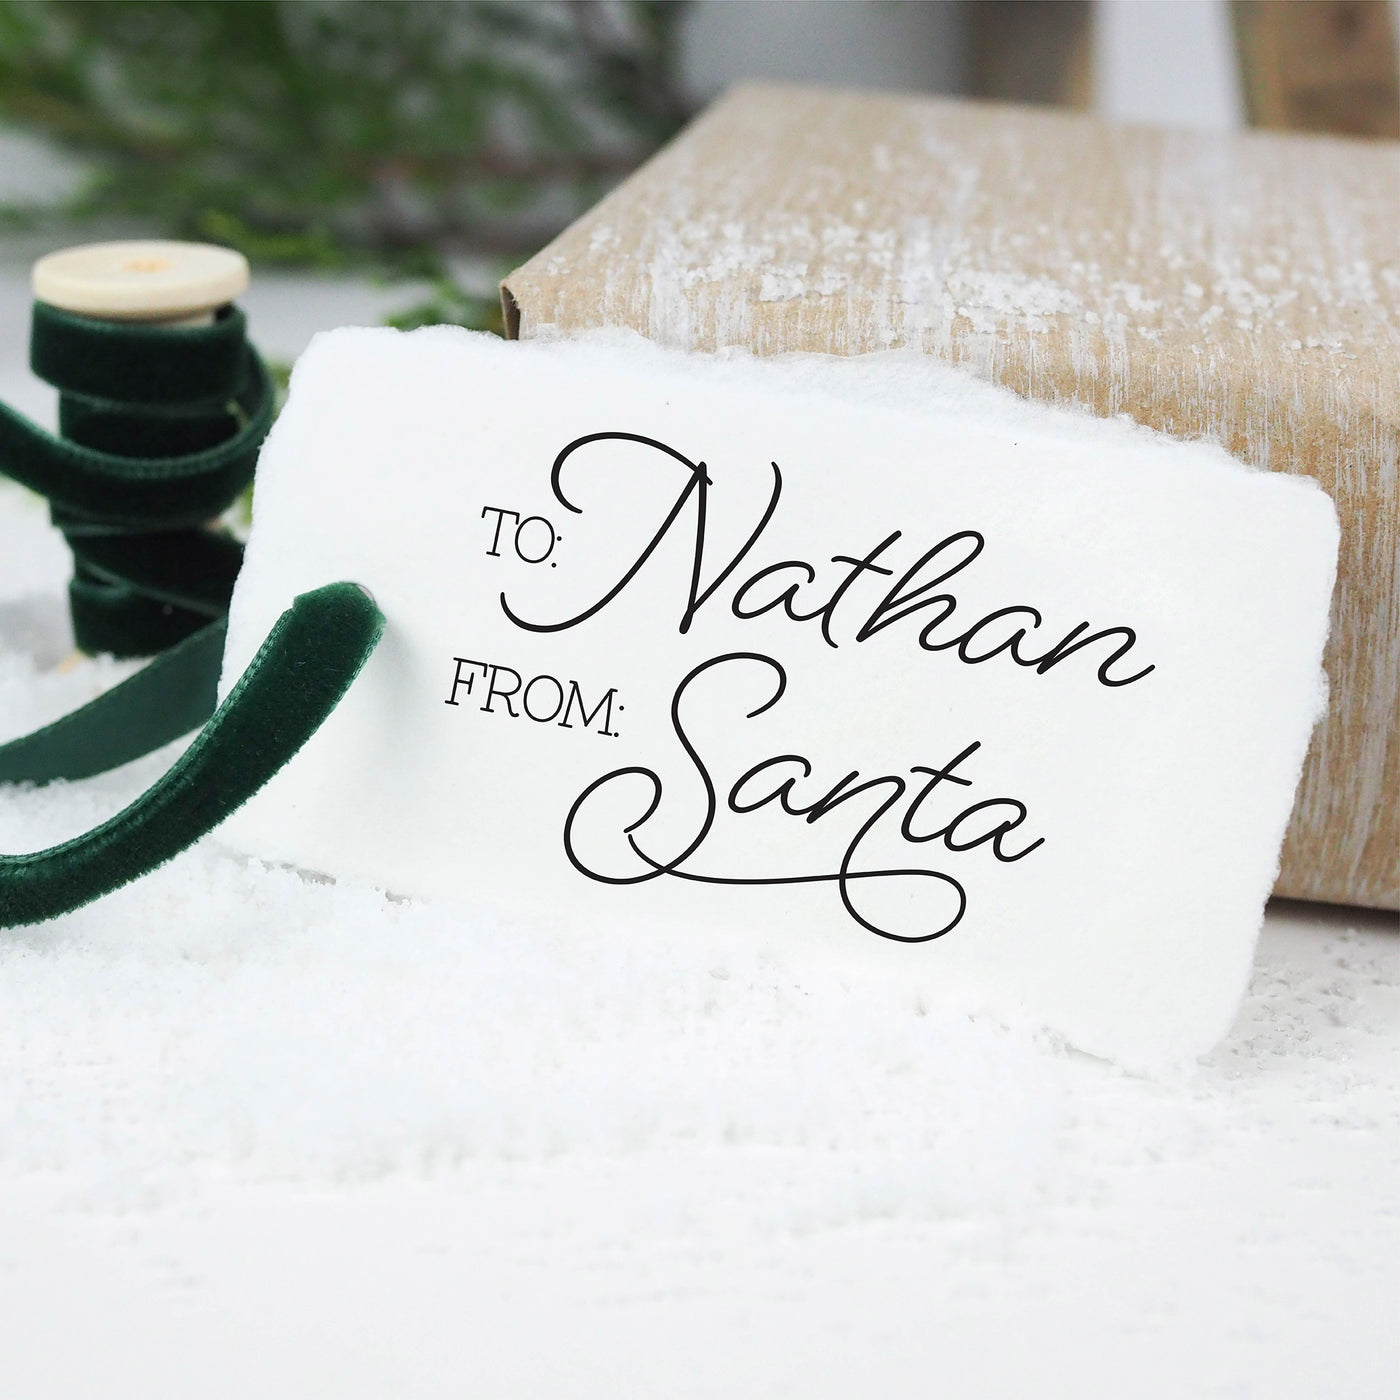 'TO, FROM SANTA' RUBBER STAMP